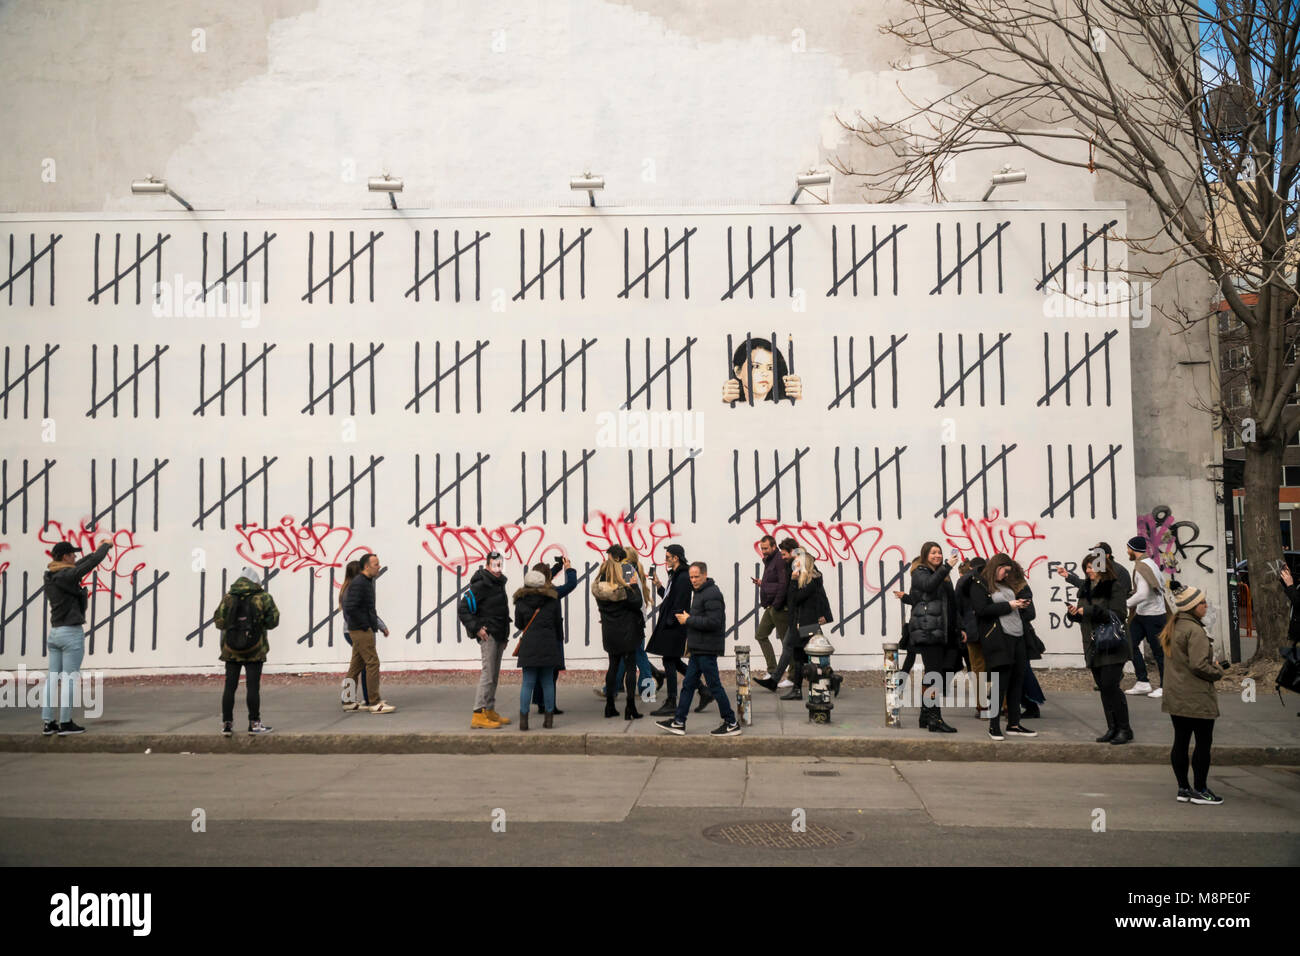 Street art enthusiasts flock to the 'Bowery Wall on Houston Street in New York on Saturday, March 17, 2018 to view and photograph artist Banksy's collaboration with the street artist Borf. The work is a tribute to the jailed Turkish Kurdish artist Zehra Dogan who was arrested for painting a work featuring a Kurdish town in ruins after a conflict between the army and Kurdish rebels.  Banksy's work previously appeared in New York on October 2013 when he created a work a day during his one month 'residency'. (Â© Richard B. Levine) Stock Photo